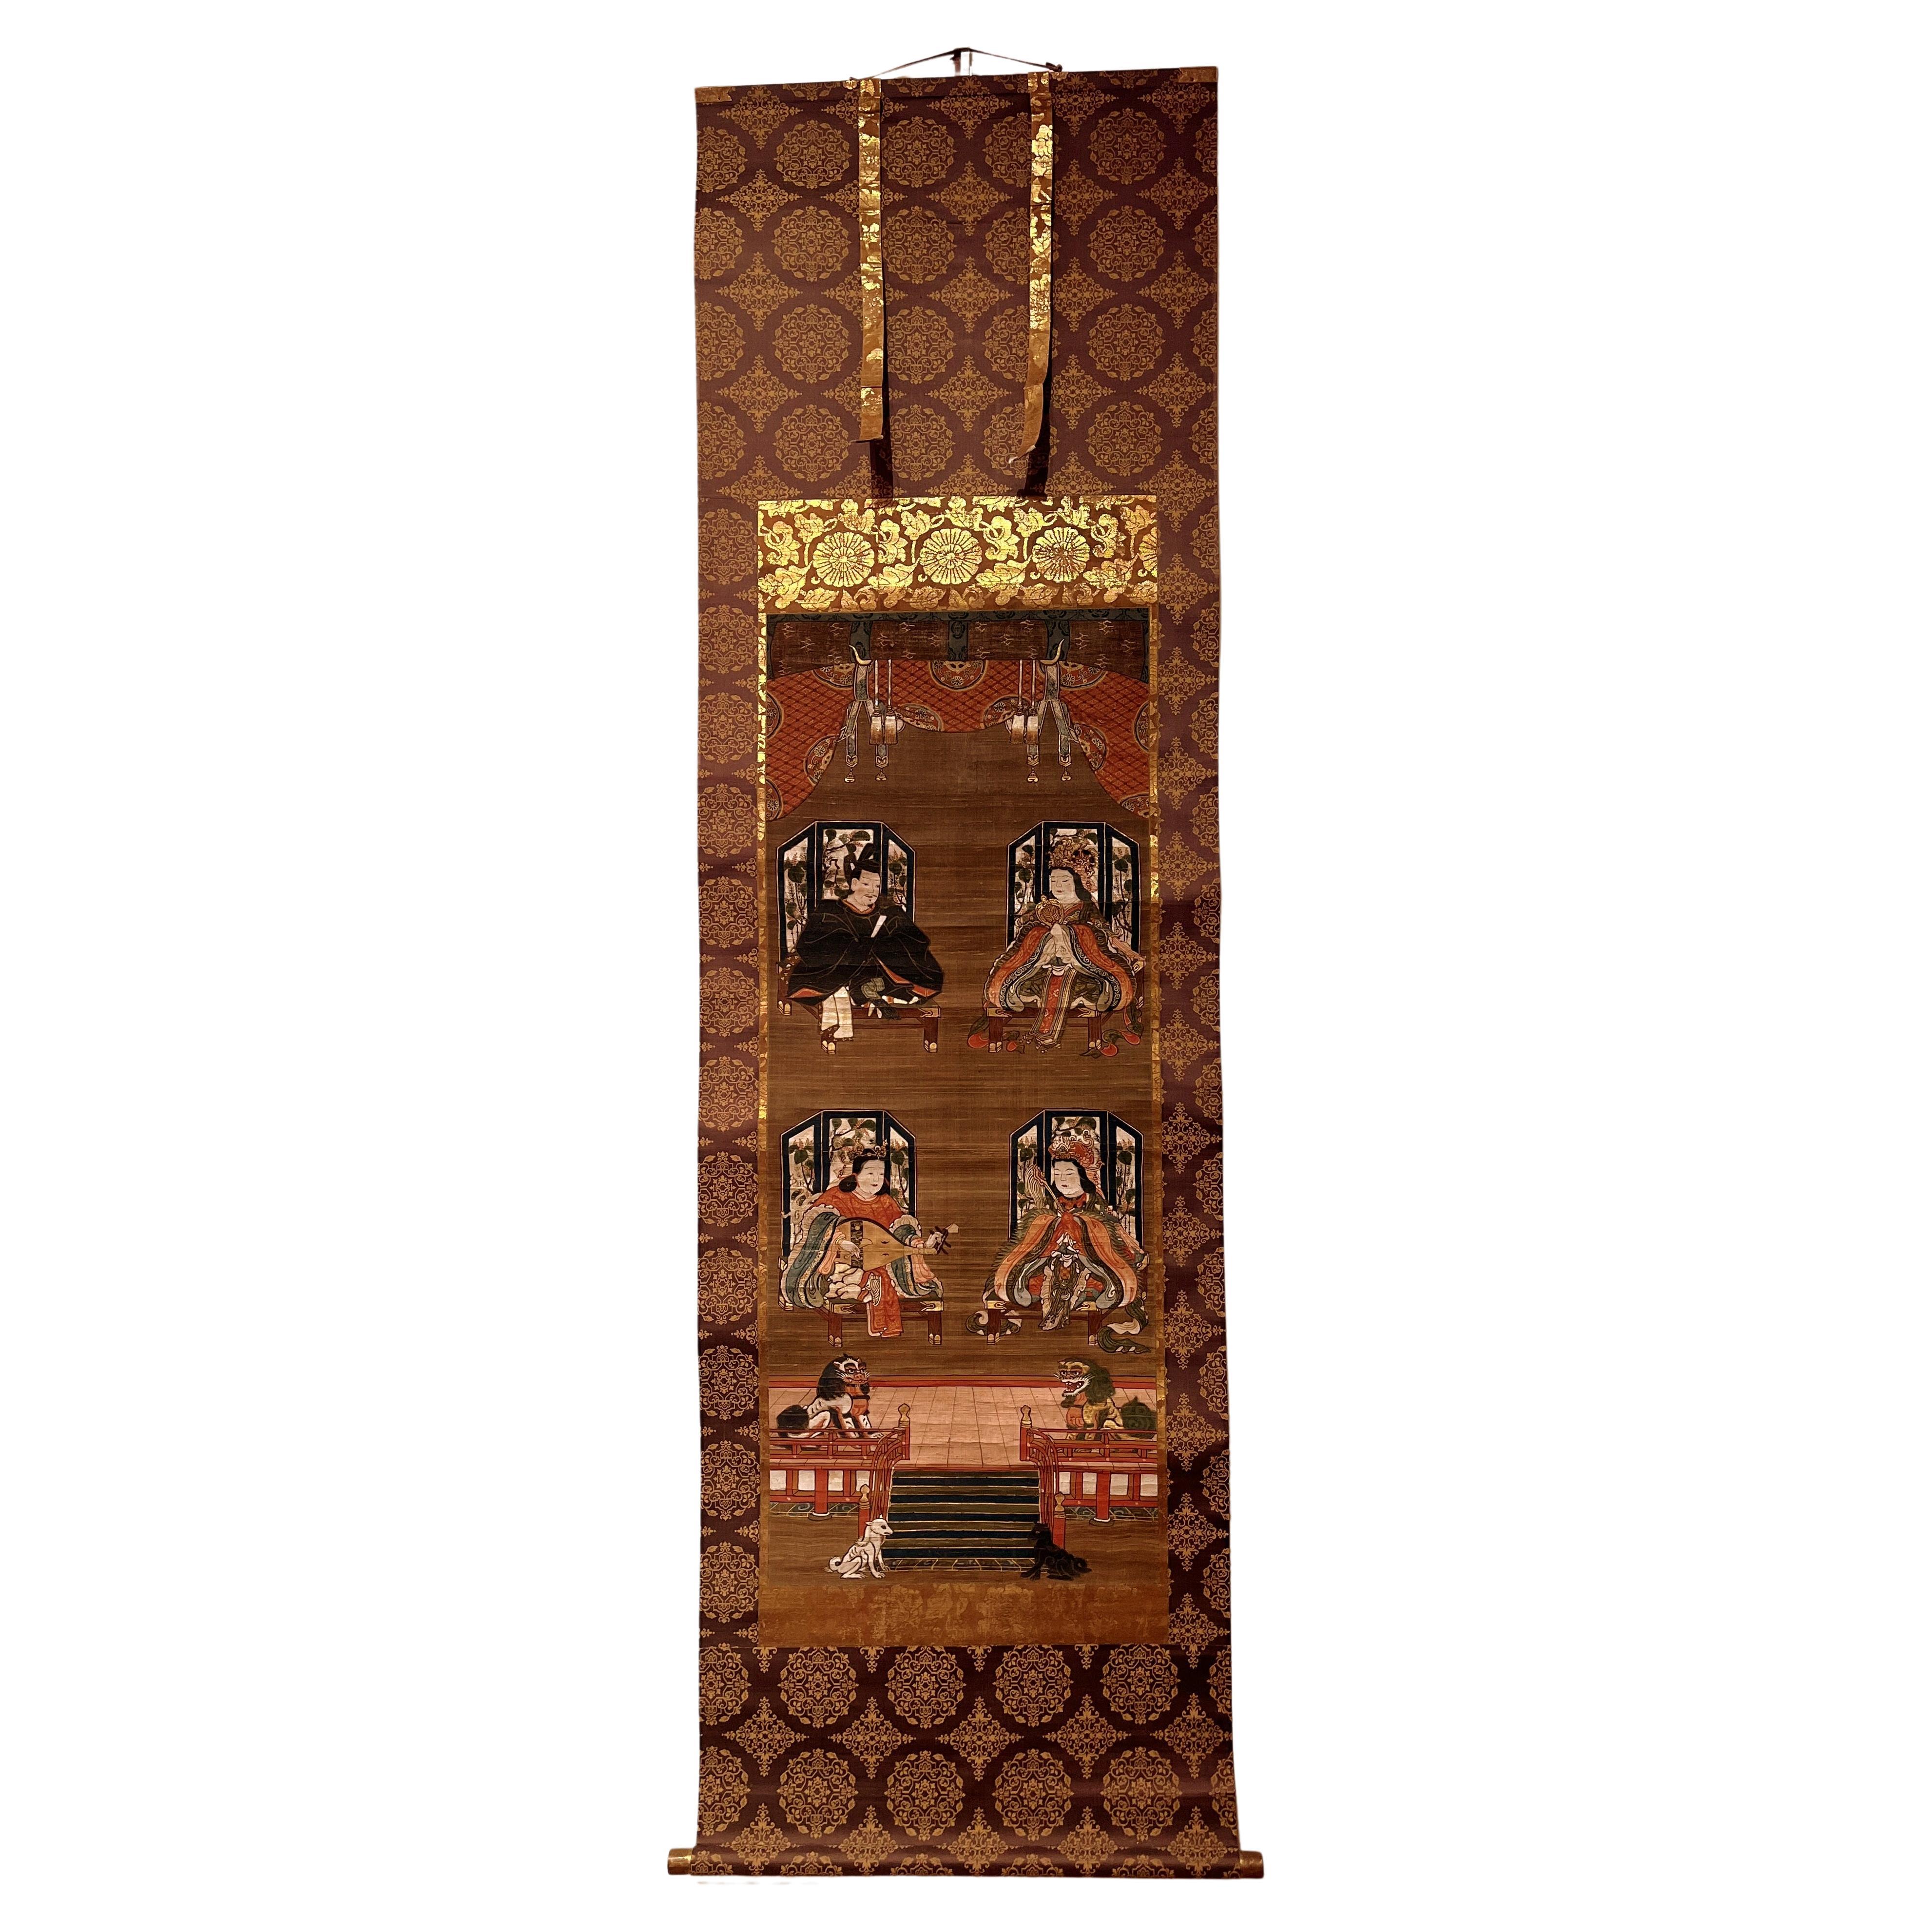 Japanese Shito Religion of Four Deities, Scroll Painting For Sale